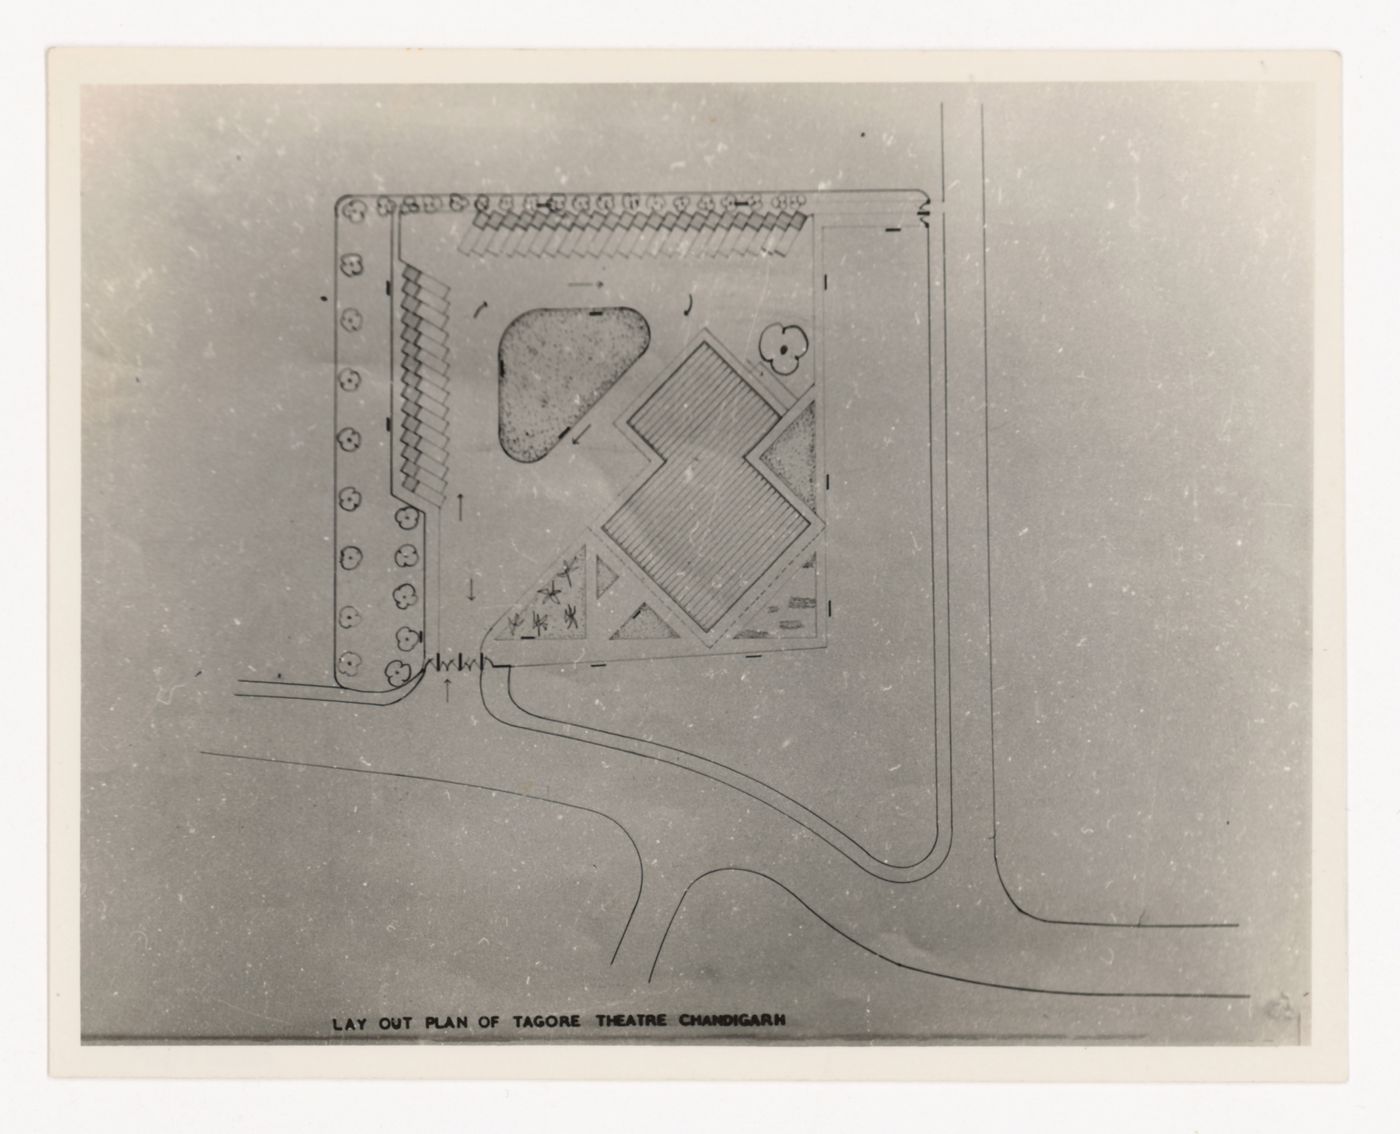 Photographic reproduction of layout plan drawing for Tagore Theatre, Chandigarh, India